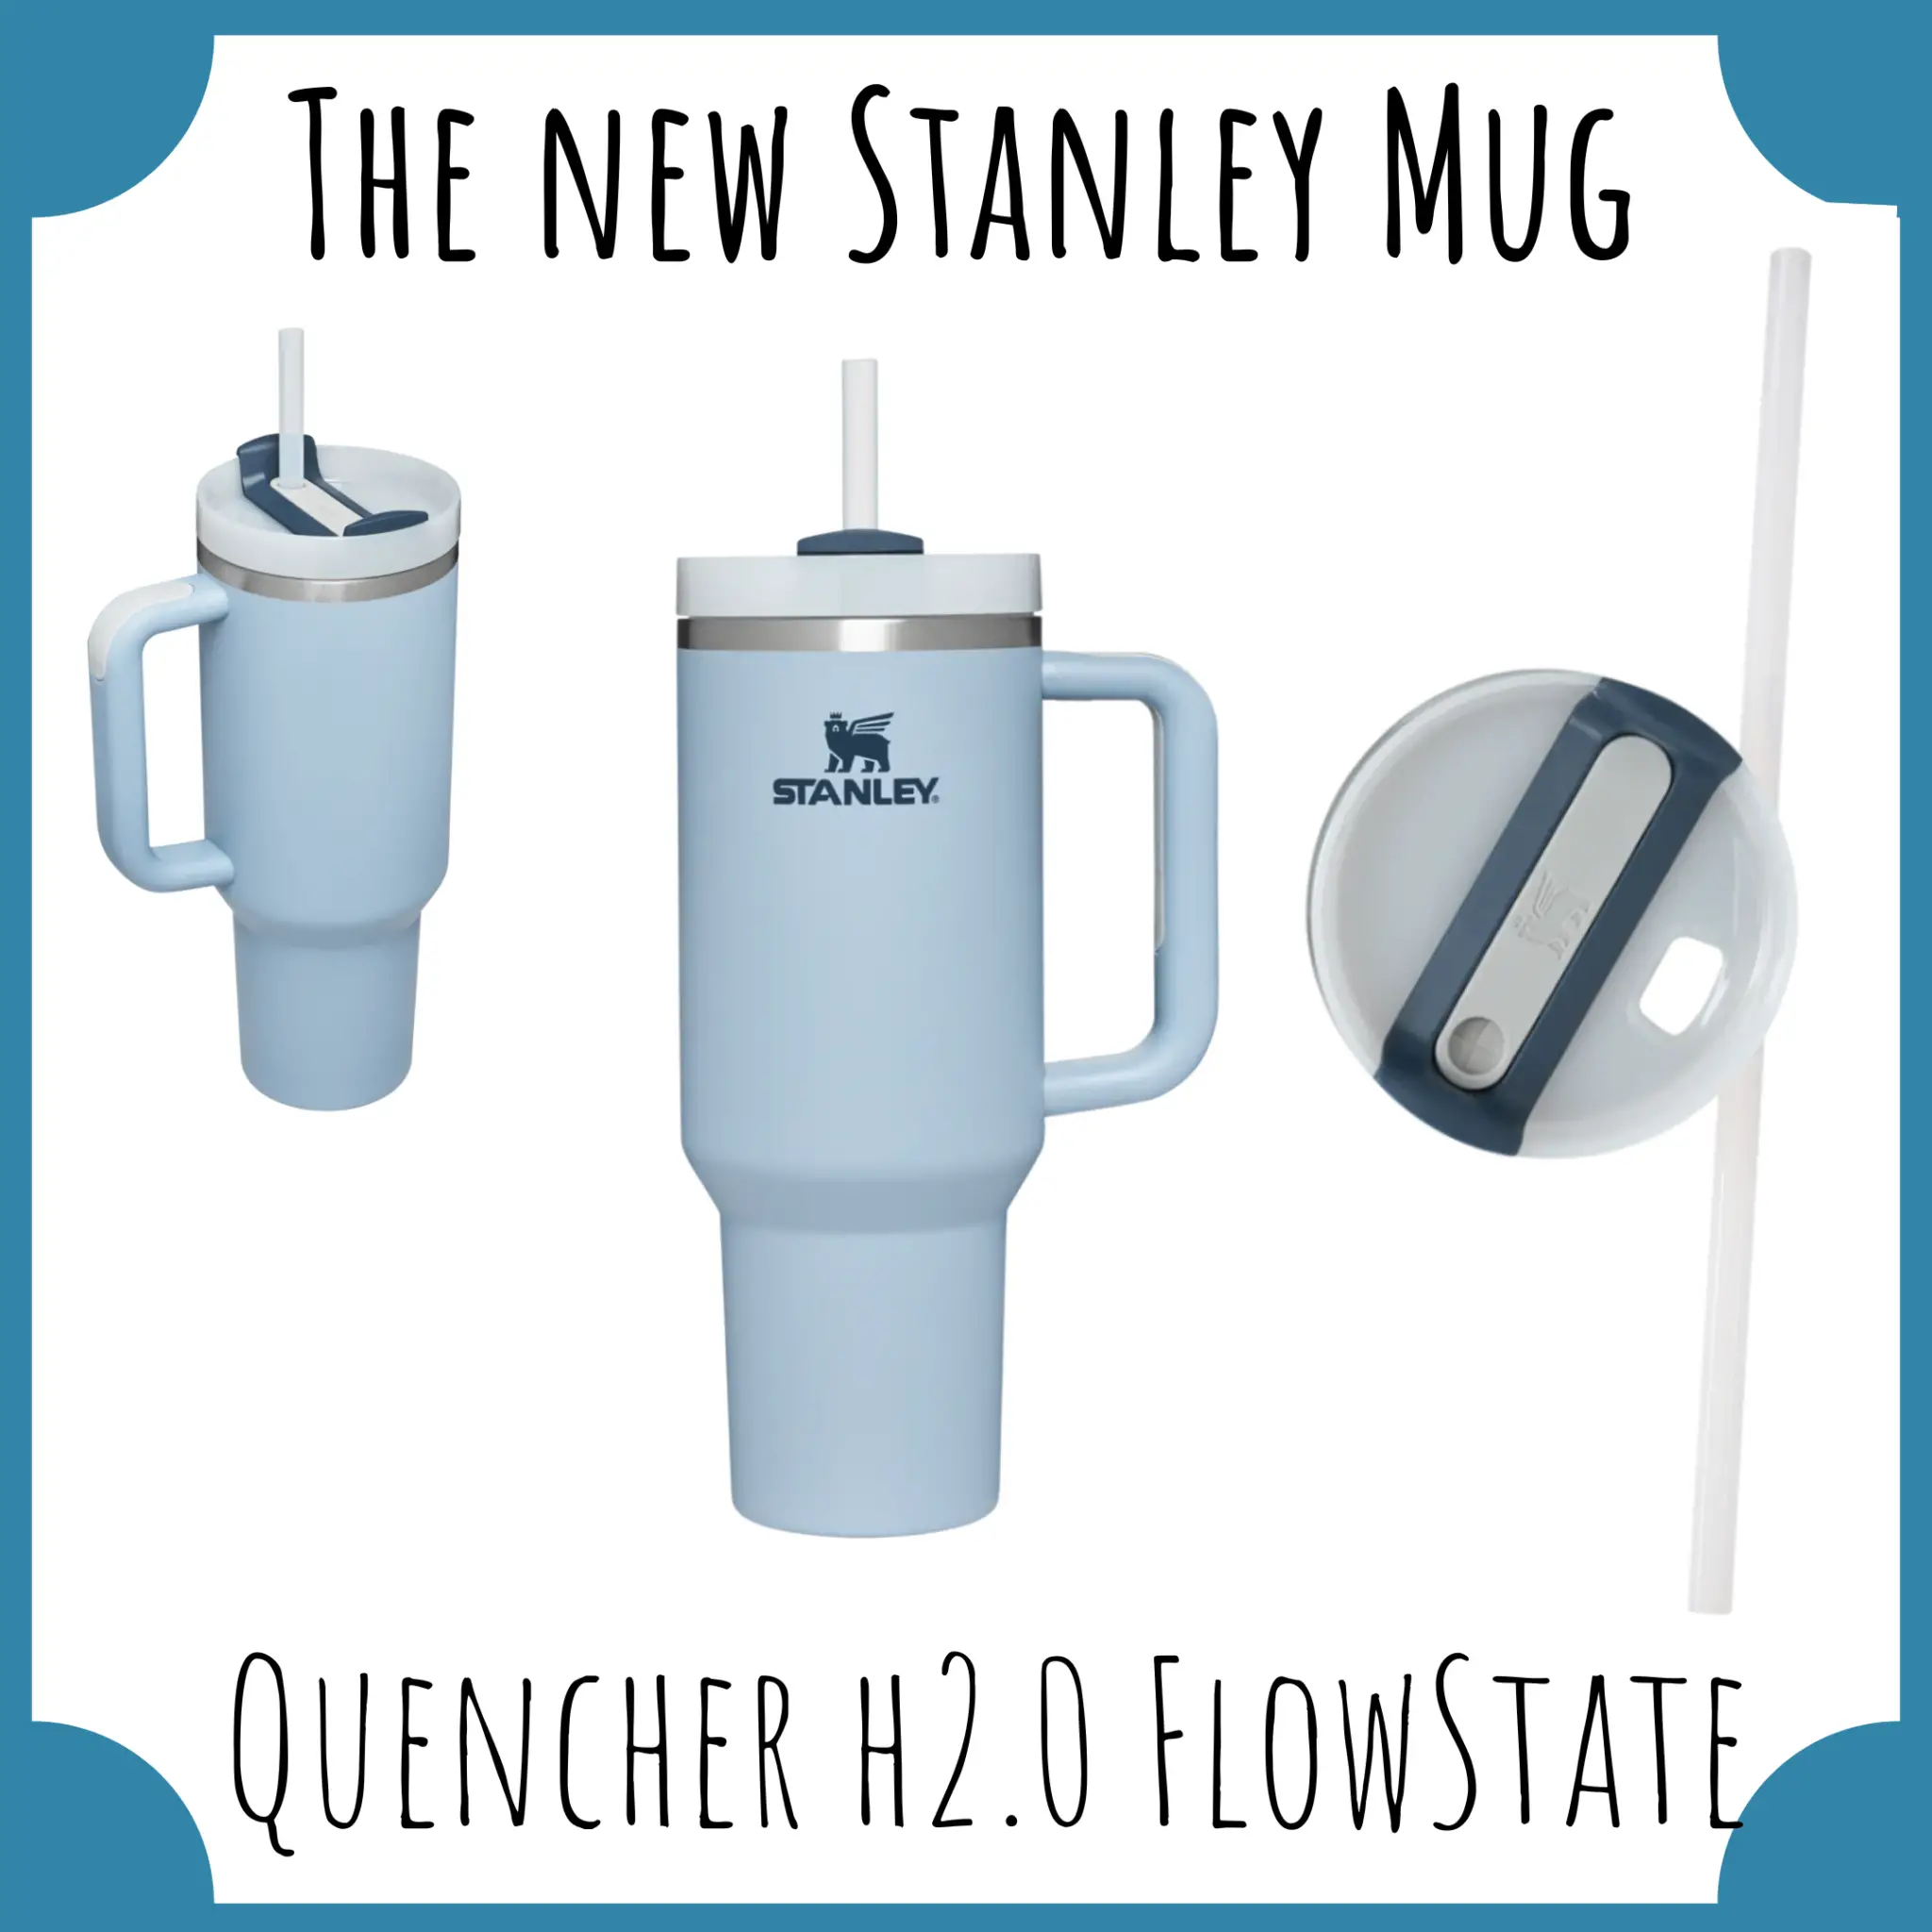 The NEW Stanley Mug Everything you need to know! The Modern Mindful Mom